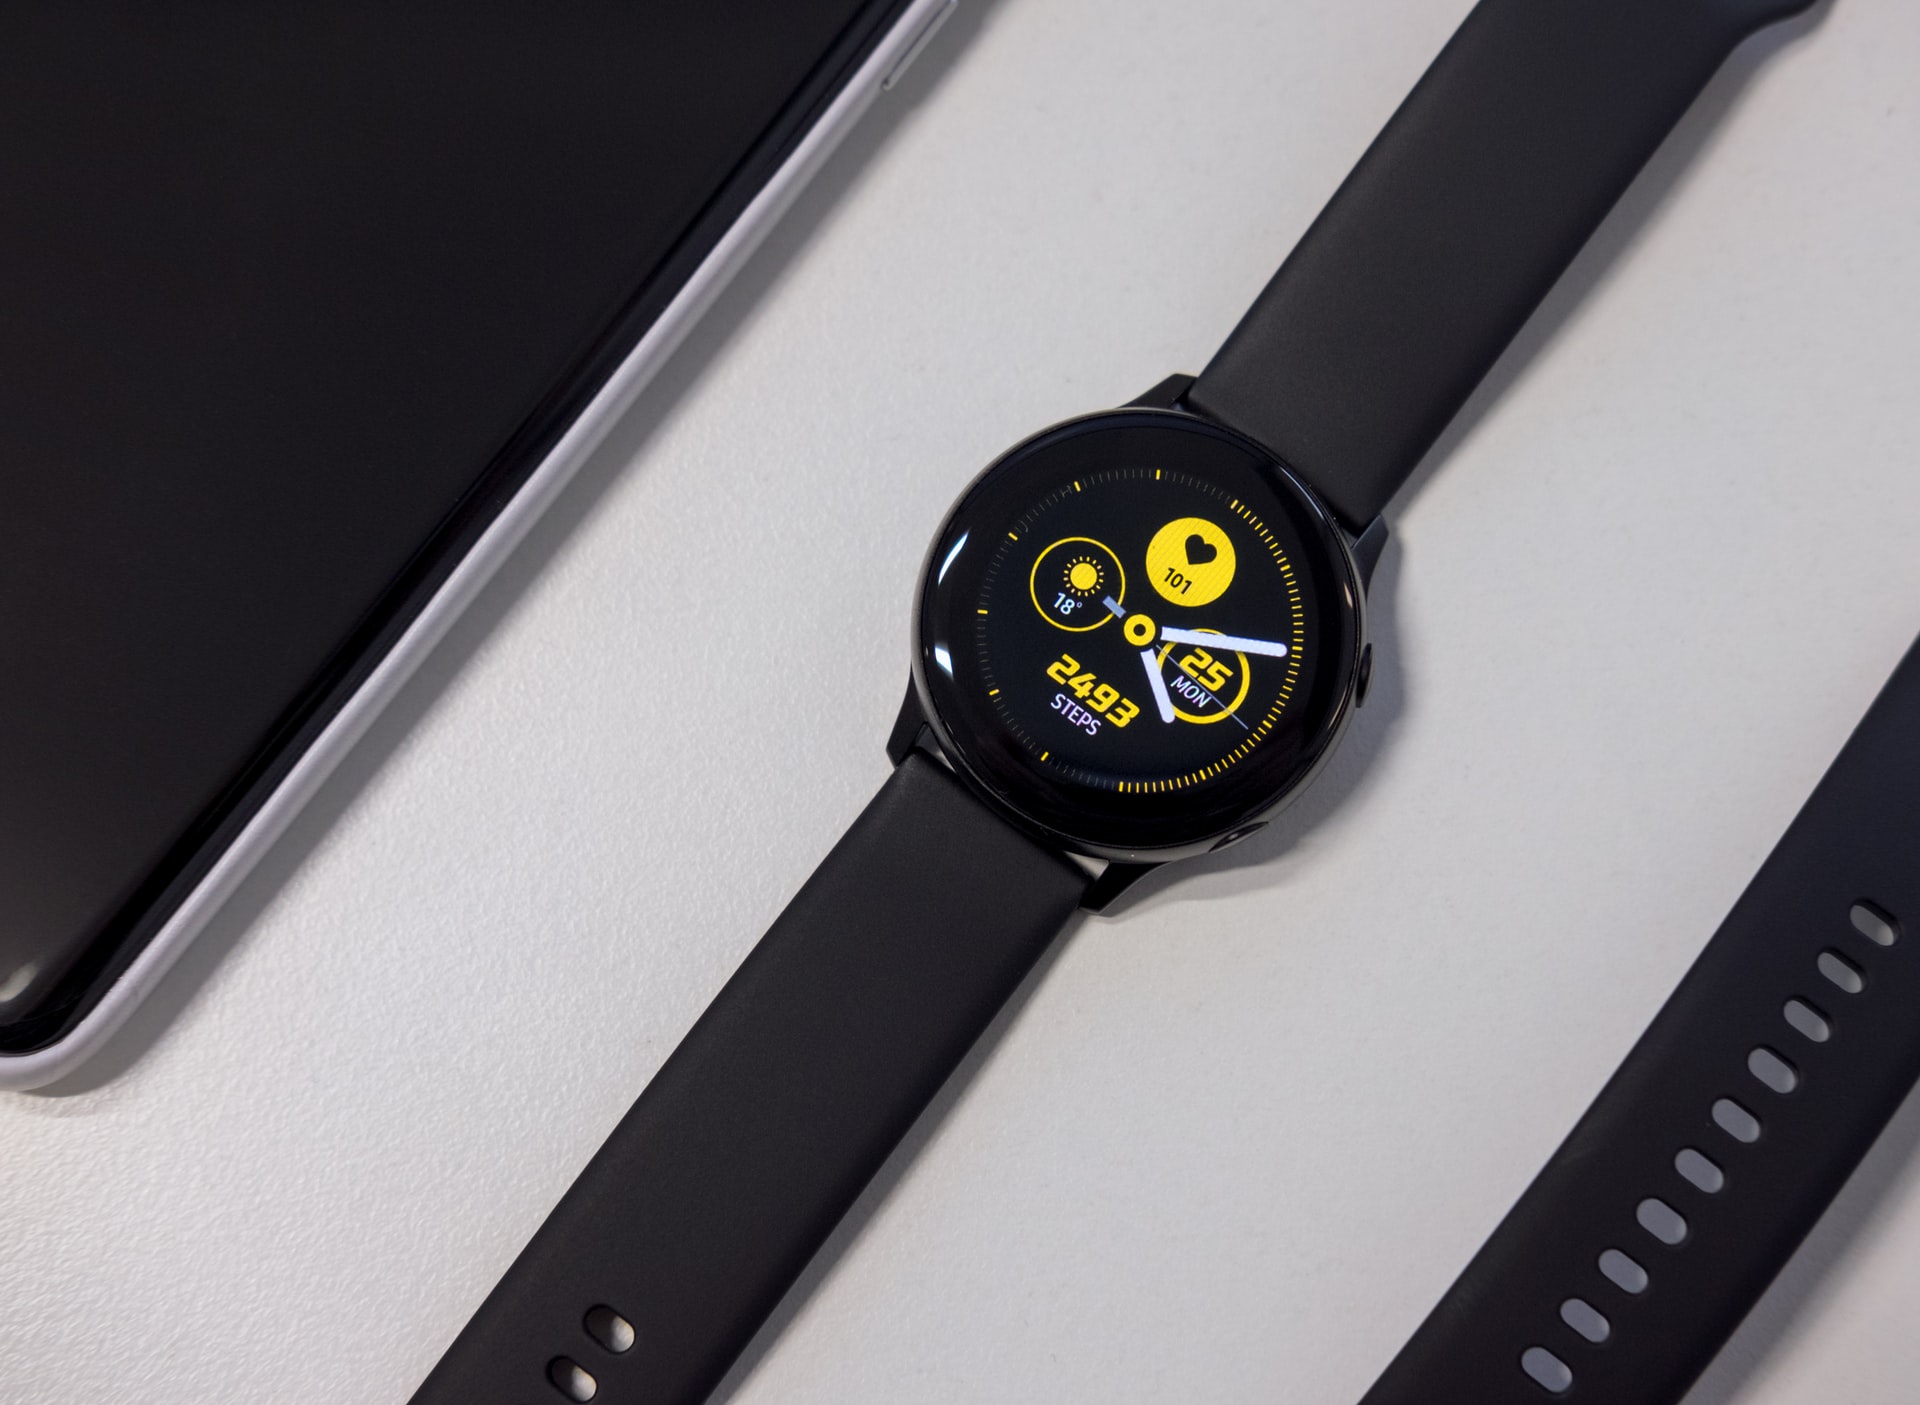 Google is reportedly working on their own in-house smartwatch